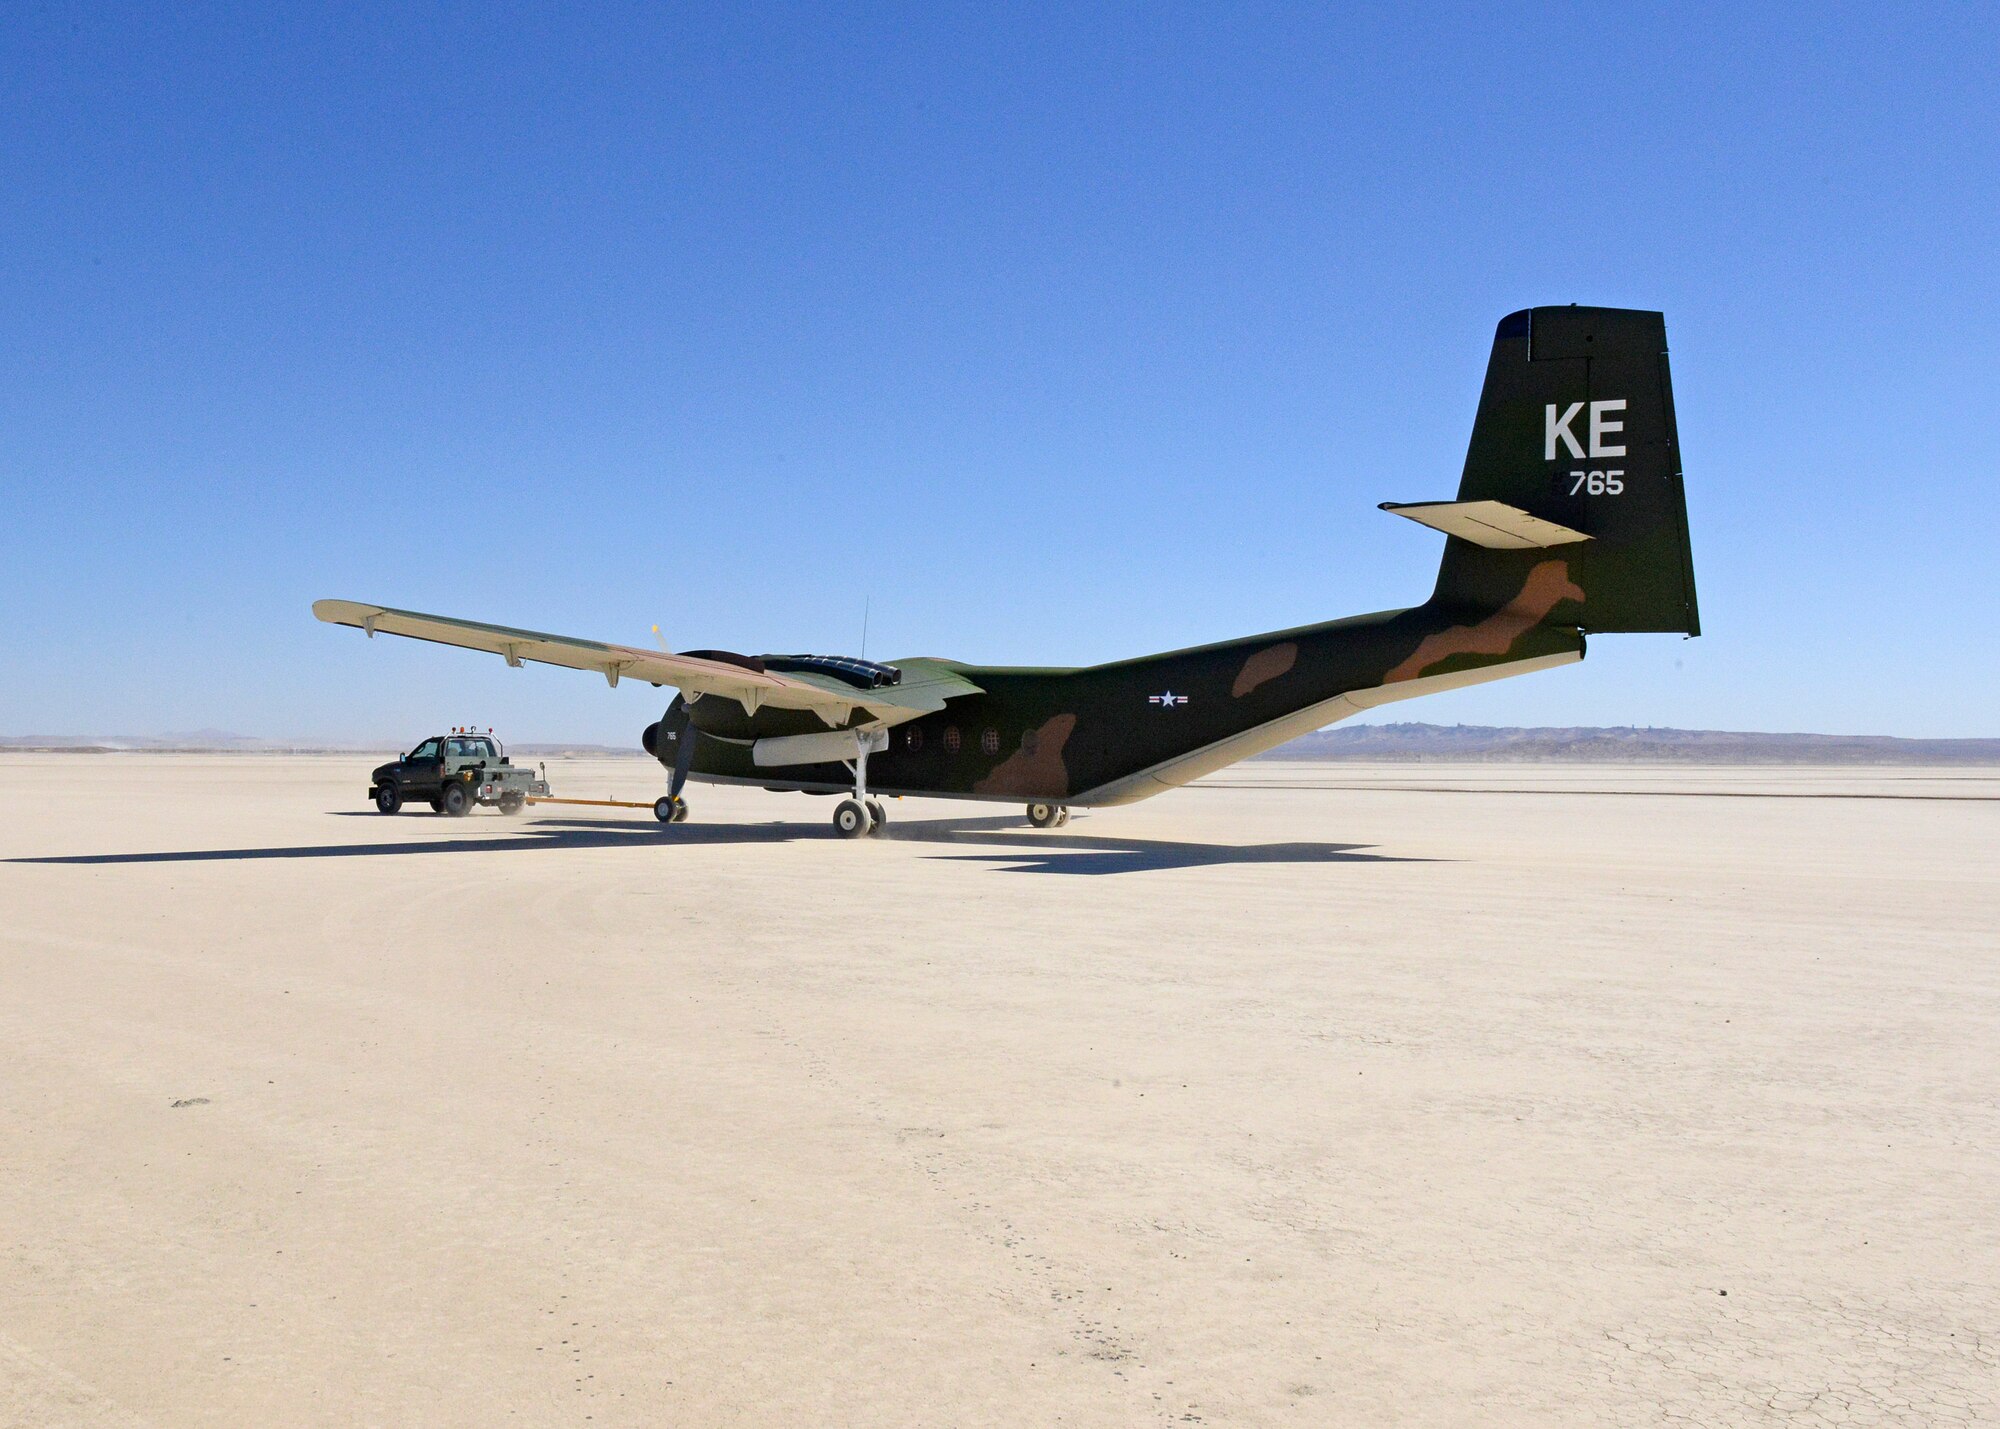 A C-7A Caribou is towed across Rogers Dry Lakebed from Edwards AFB's main base to the Air Force Flight Test Museum restoration hangar Oct. 15. (U.S. Air Force photo by Kenji Thuloweit)